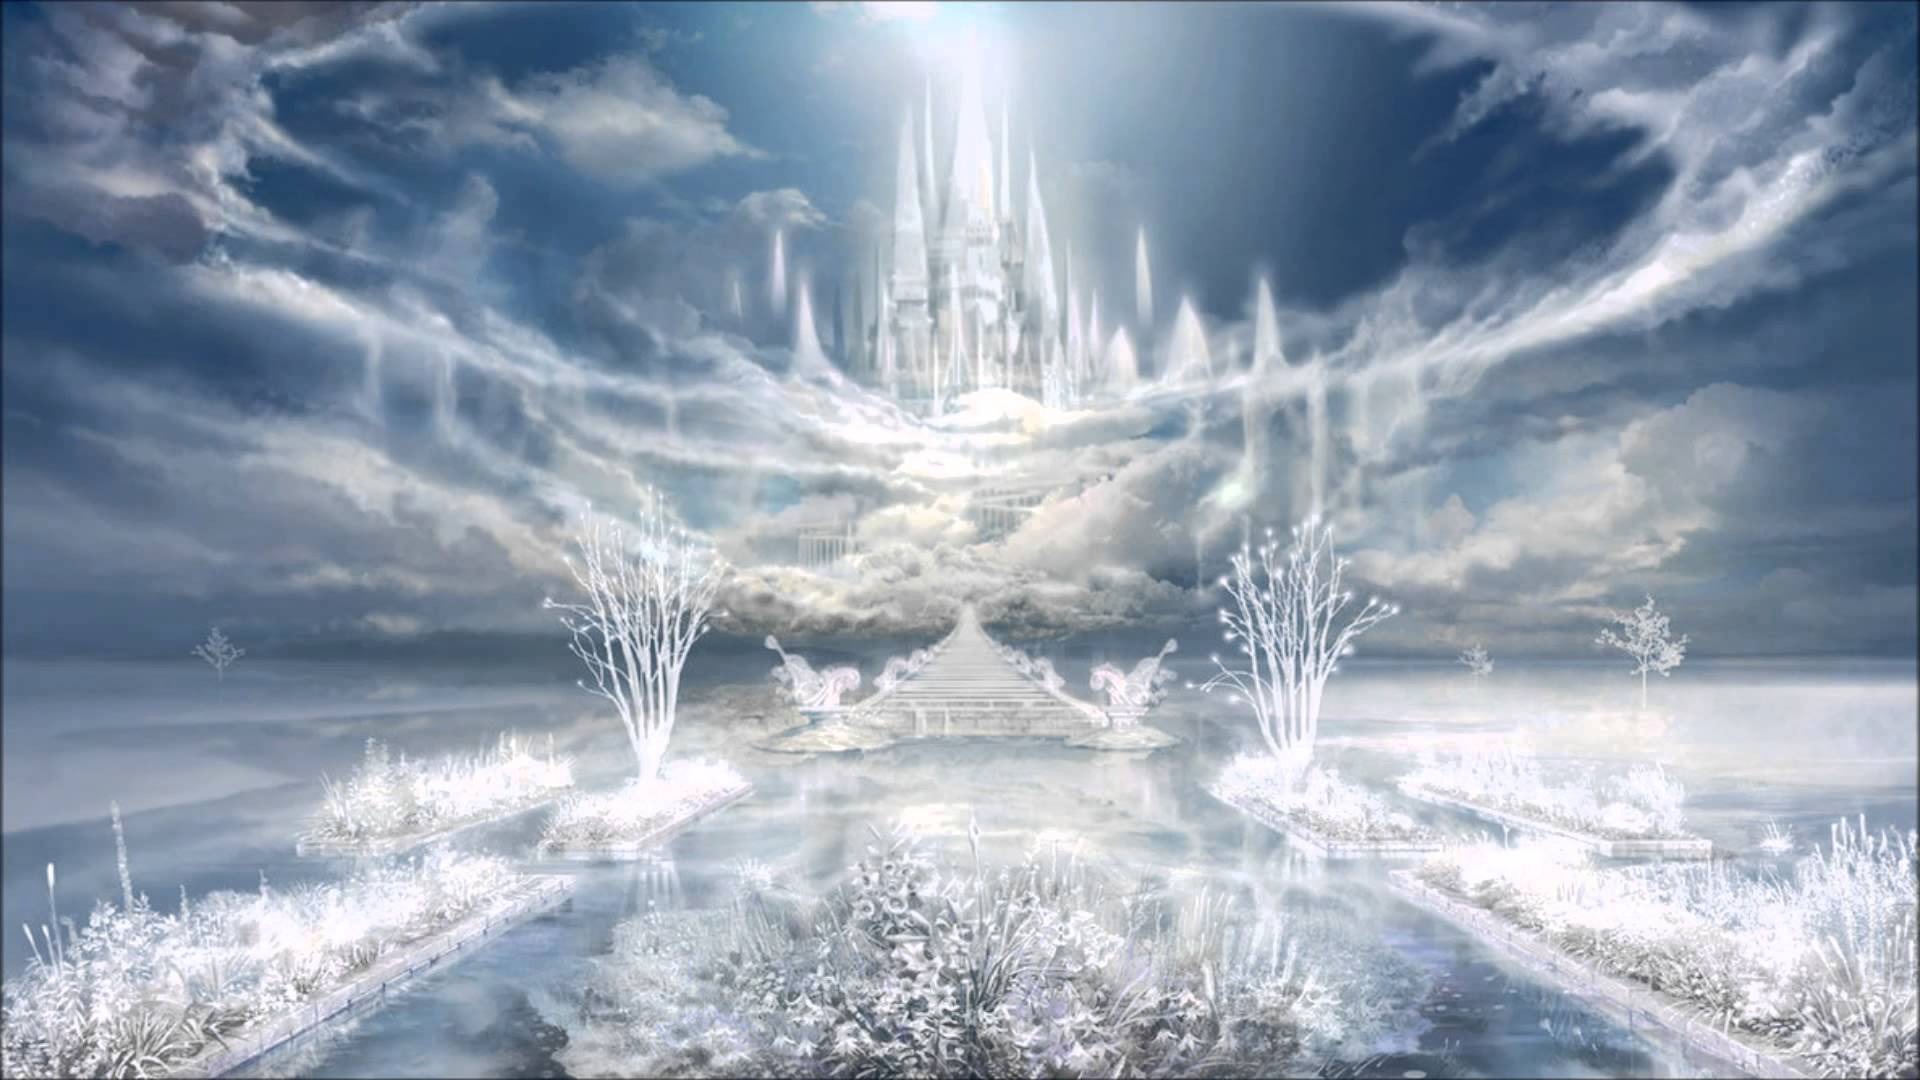 Stairway to Heaven Wallpaper High Quality